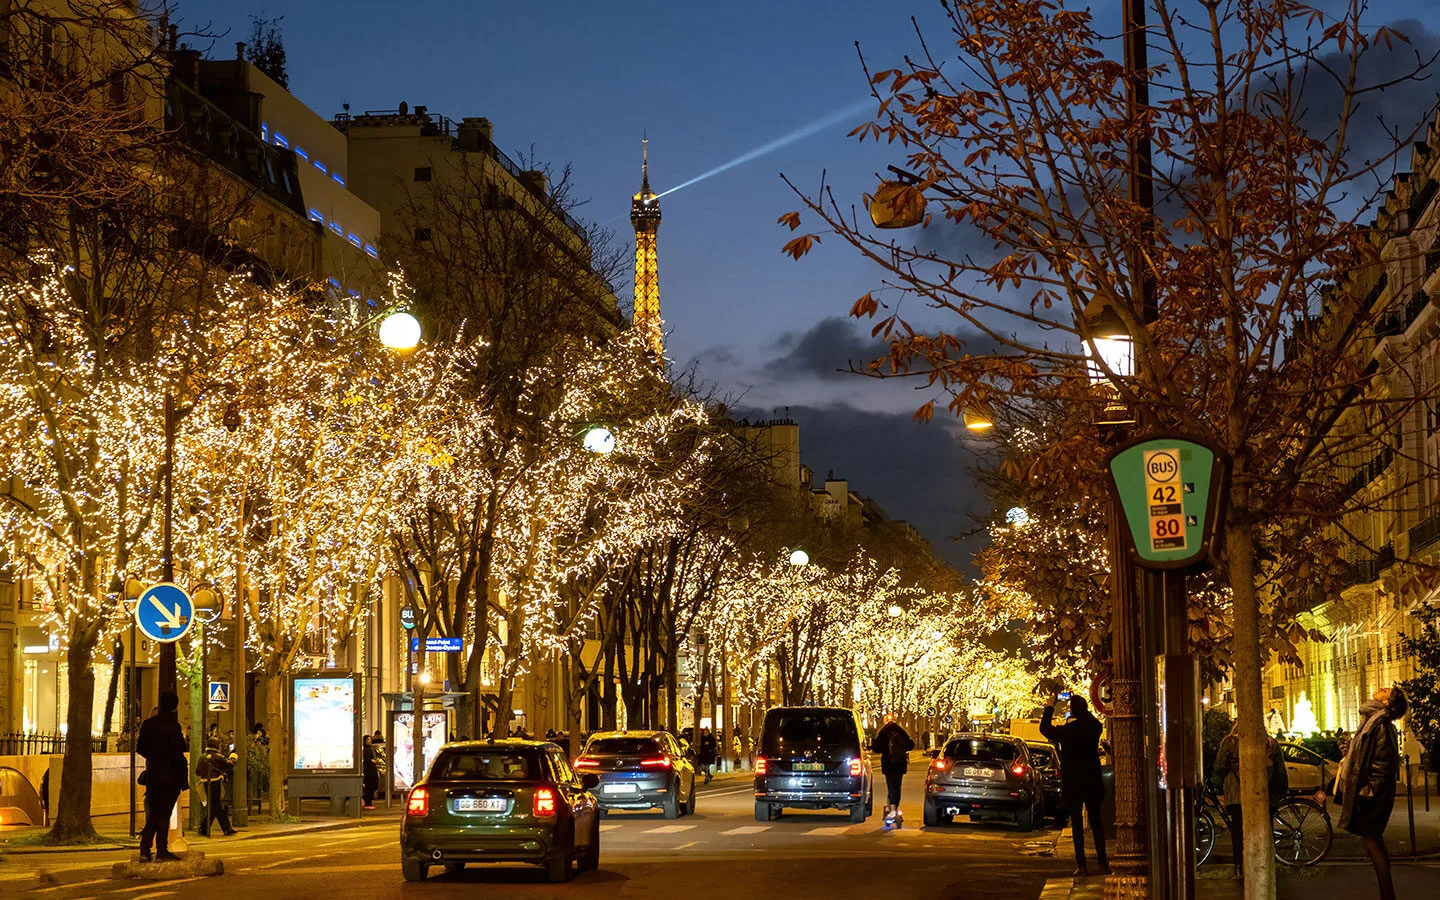 Paris at Christmas – lights on the Champs Elysees and the Eiffel Tower